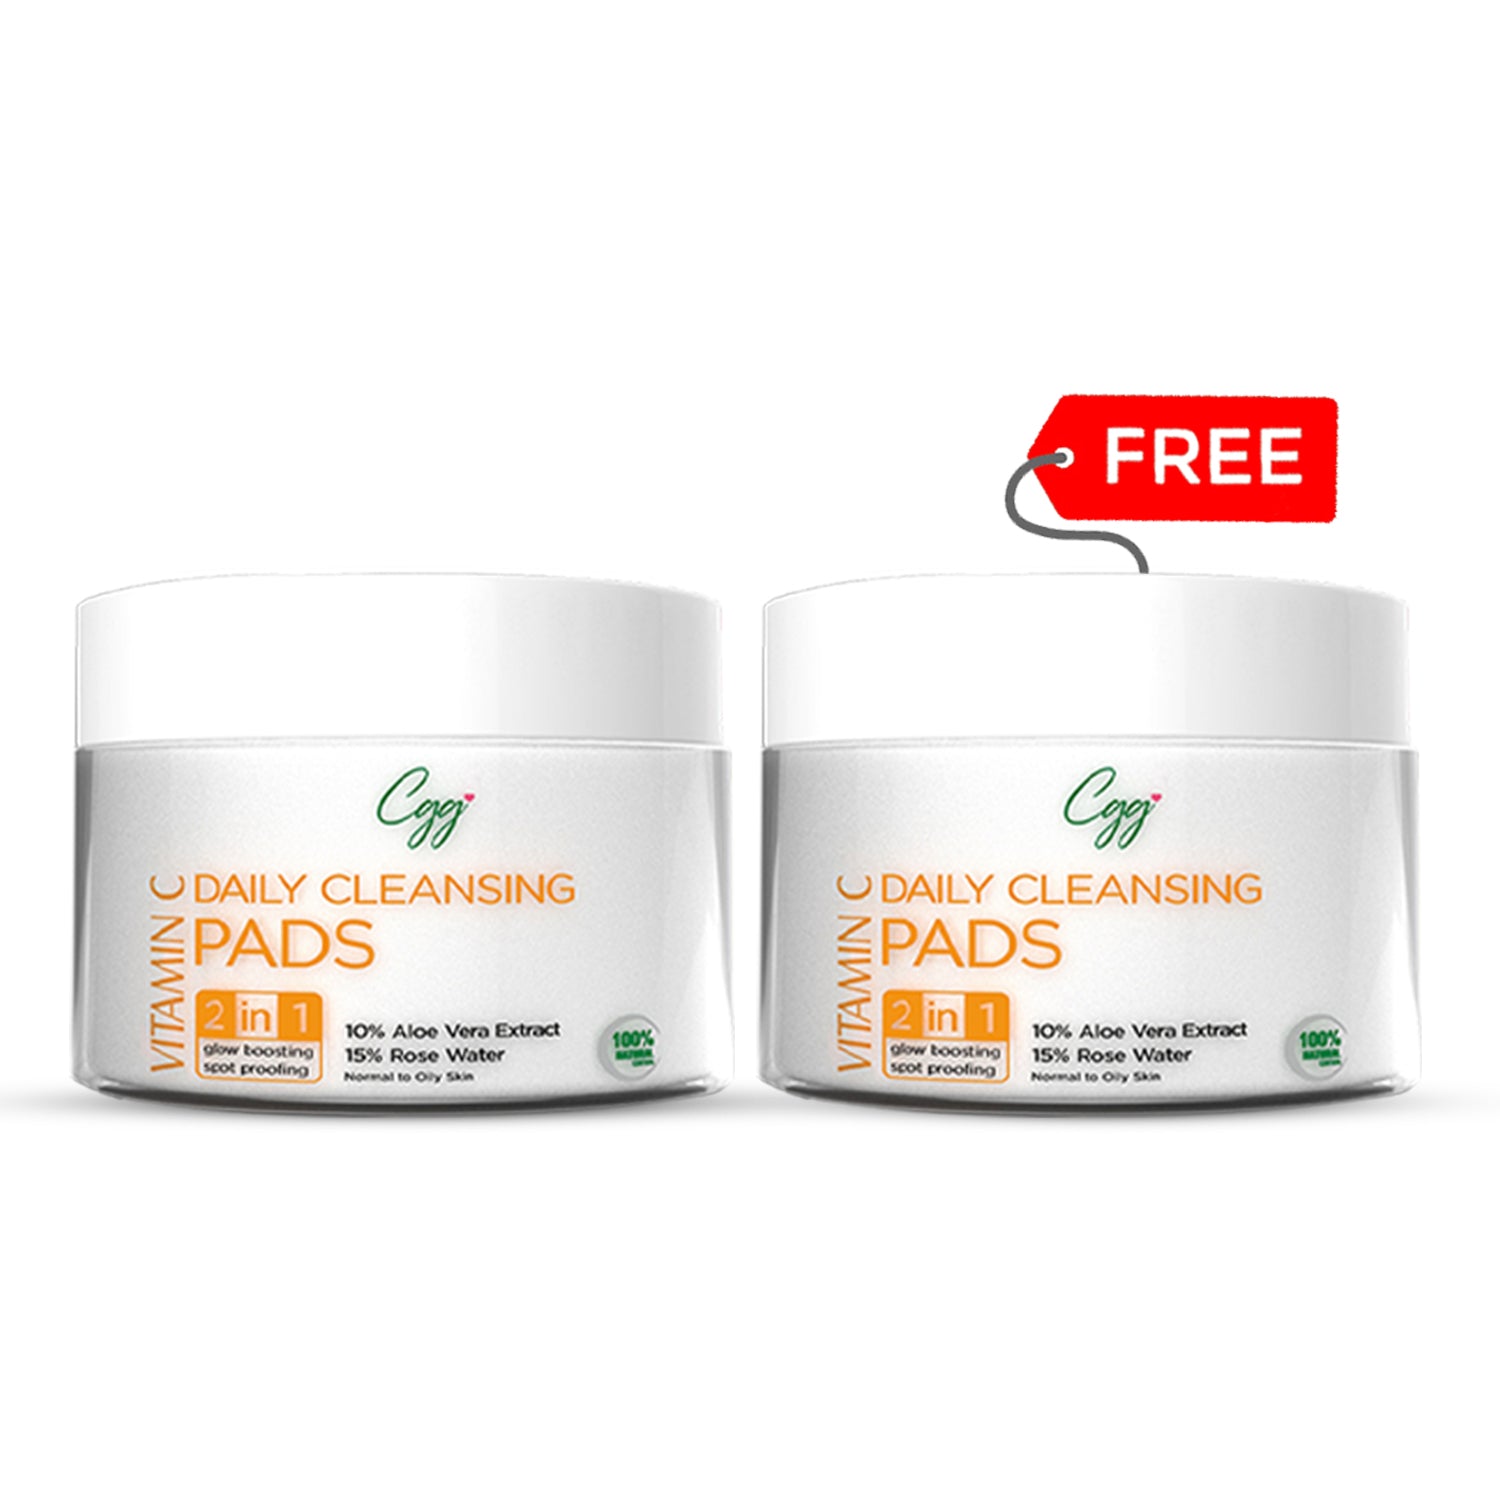 CGG Cosmetics Vitamin C Daily Cleansing Pads 50 Pads & GET FREE 50 Pads Vitamin C Daily Cleansing Pads - Glow Boosting